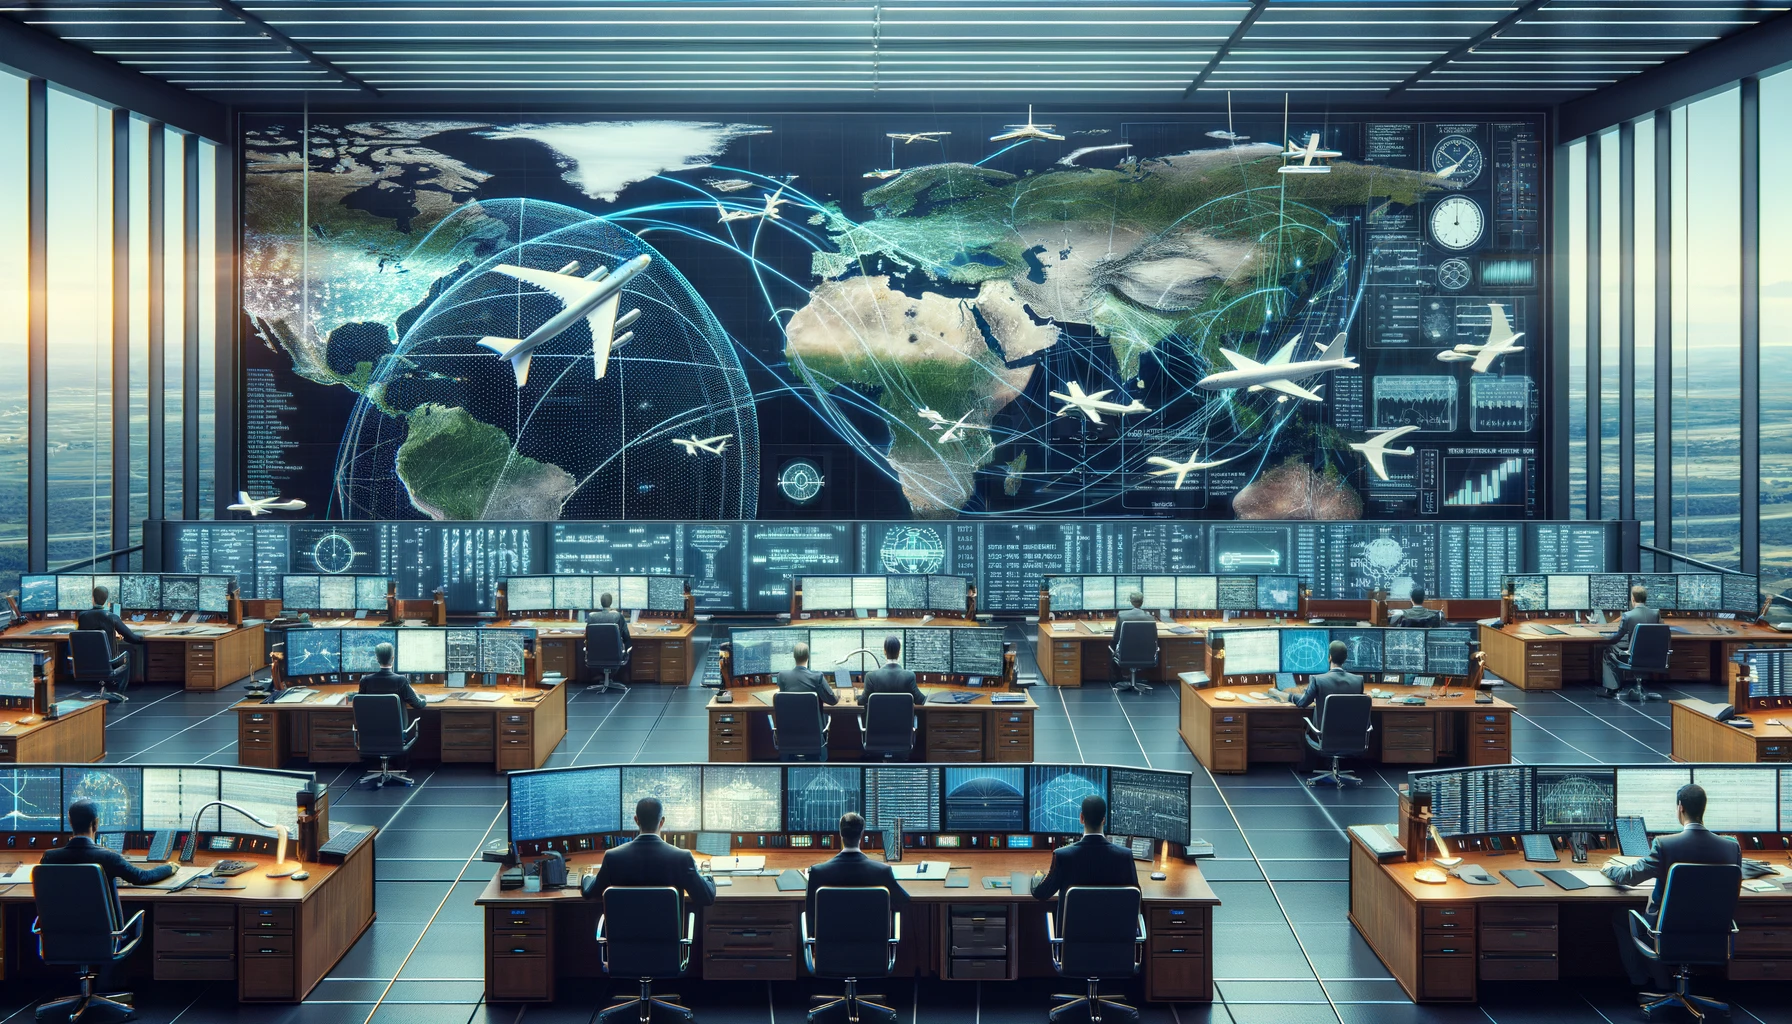 The Legal Framework of Air Navigation Services. The setting is a sophisticated air traffic control center